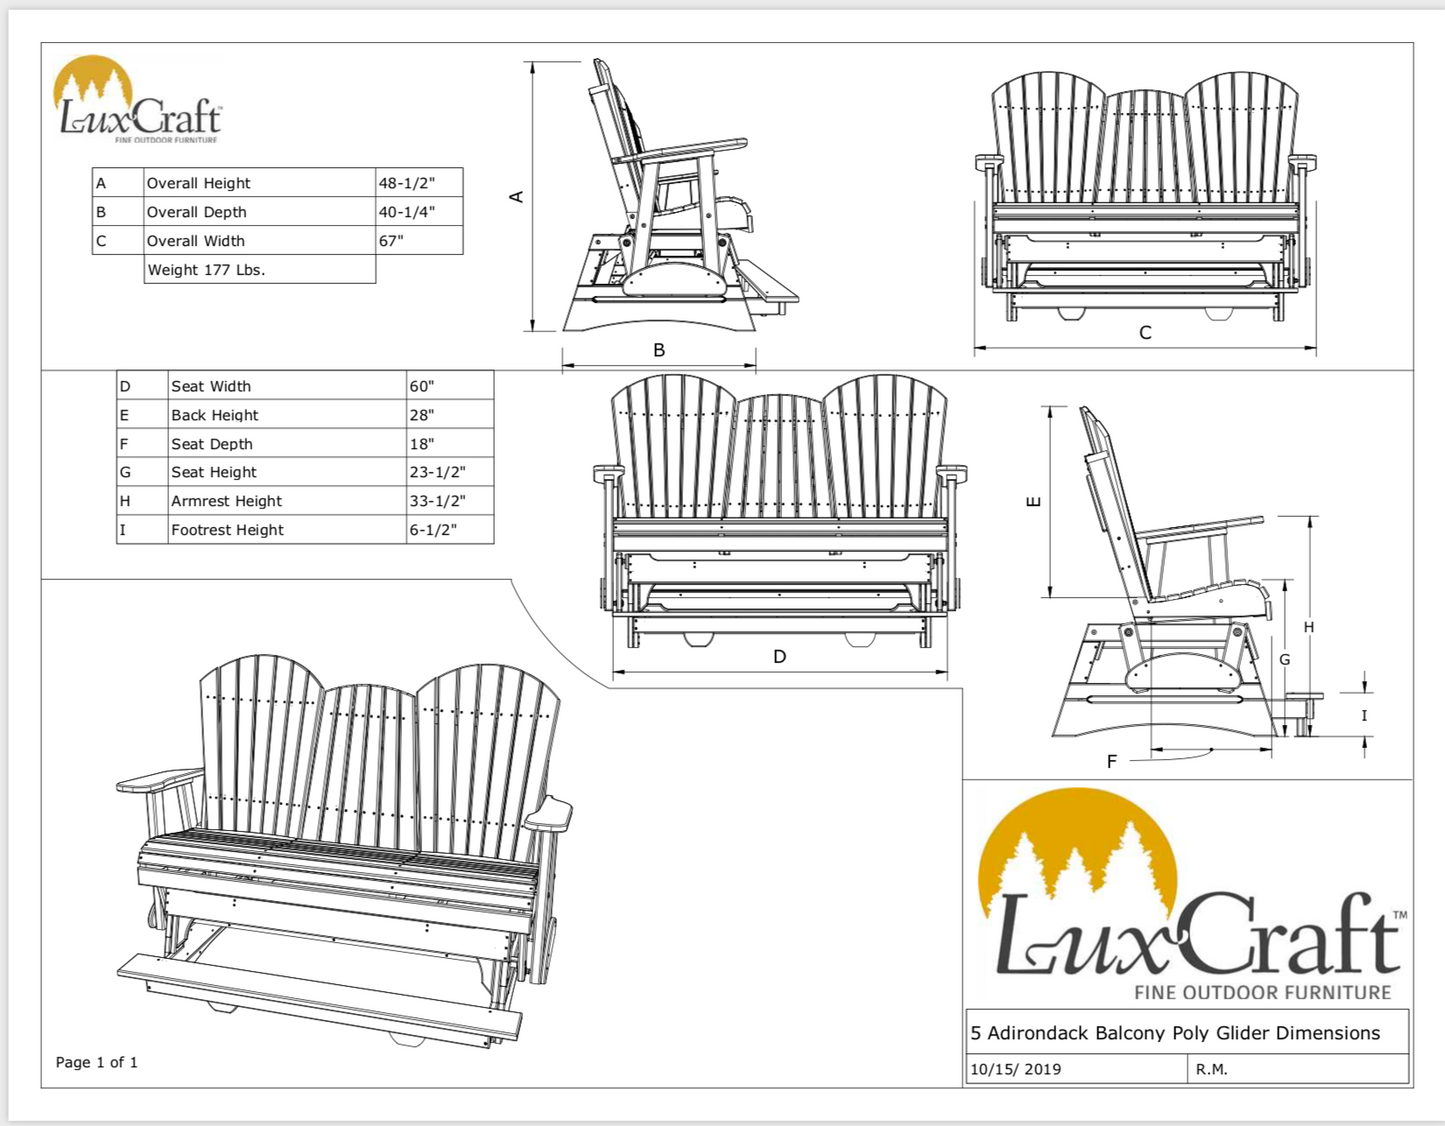 luxcraft 5ft adirondack balcony poly glider dimensions page